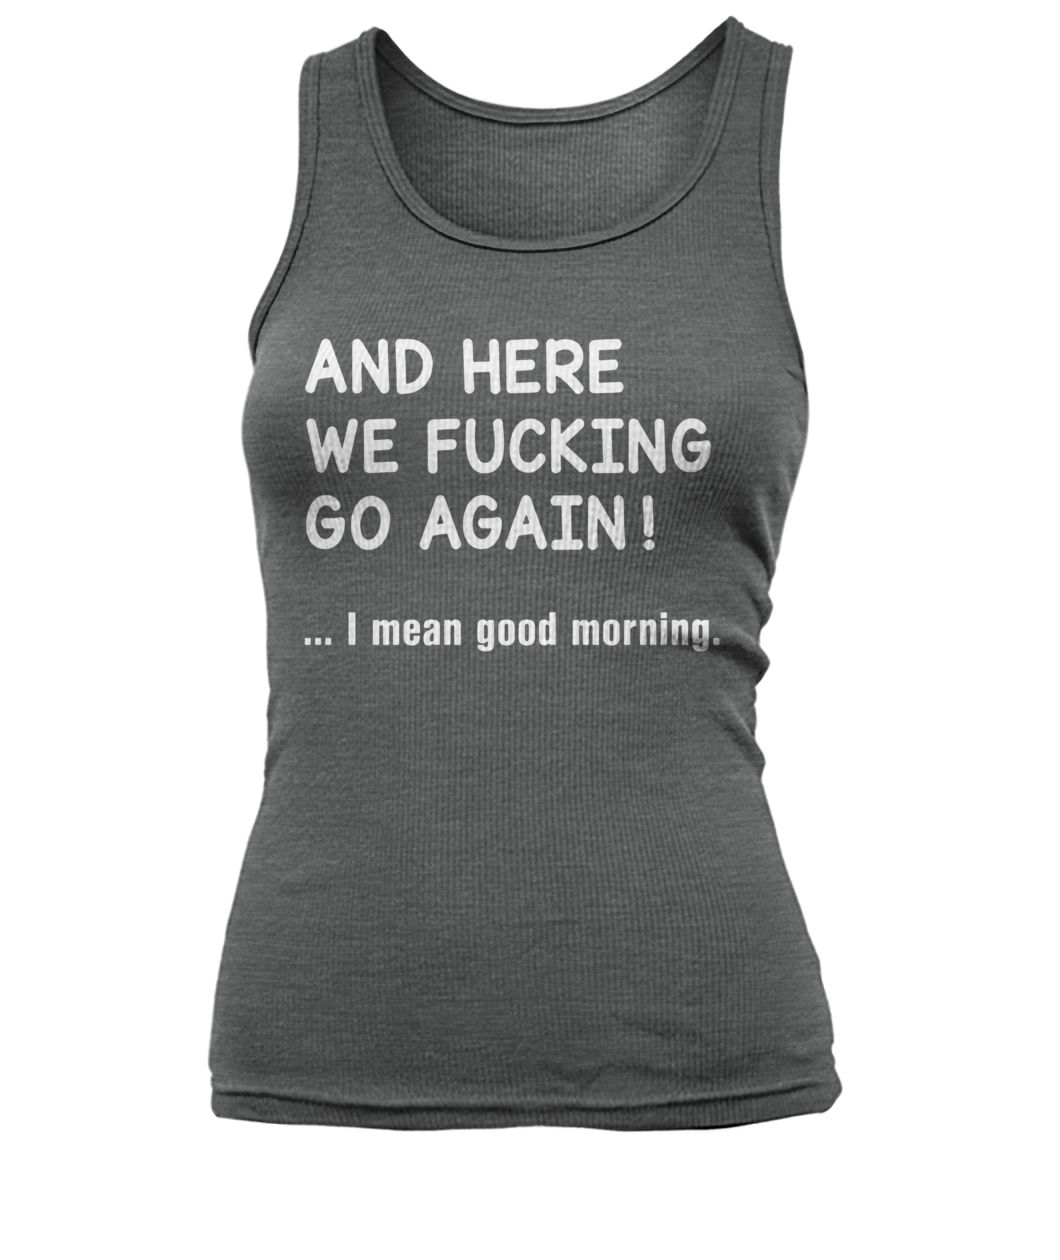 And here we fucking go again I mean good morning women's tank top